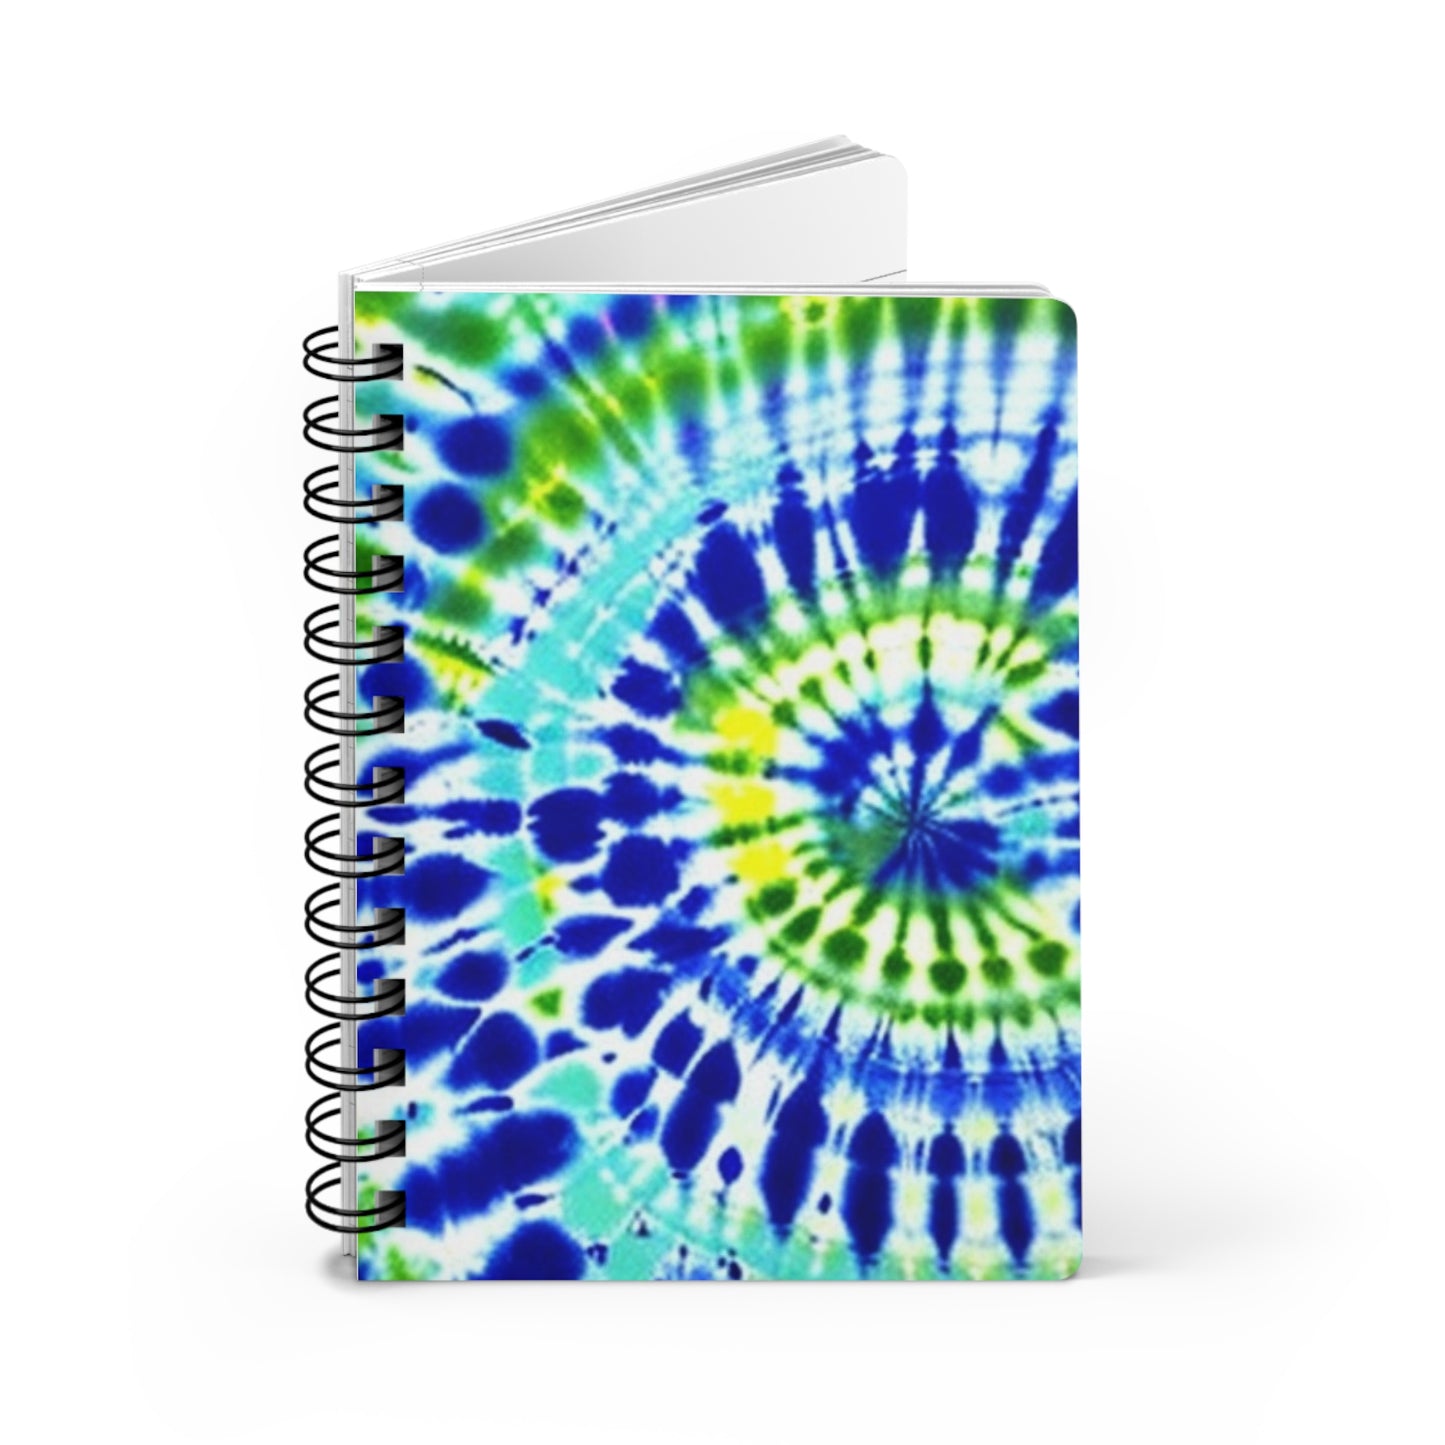 Blue and Lime Green Beach Surfer Coastal Tie Dye Writing Sketch Inspiration Spiral Bound Journal